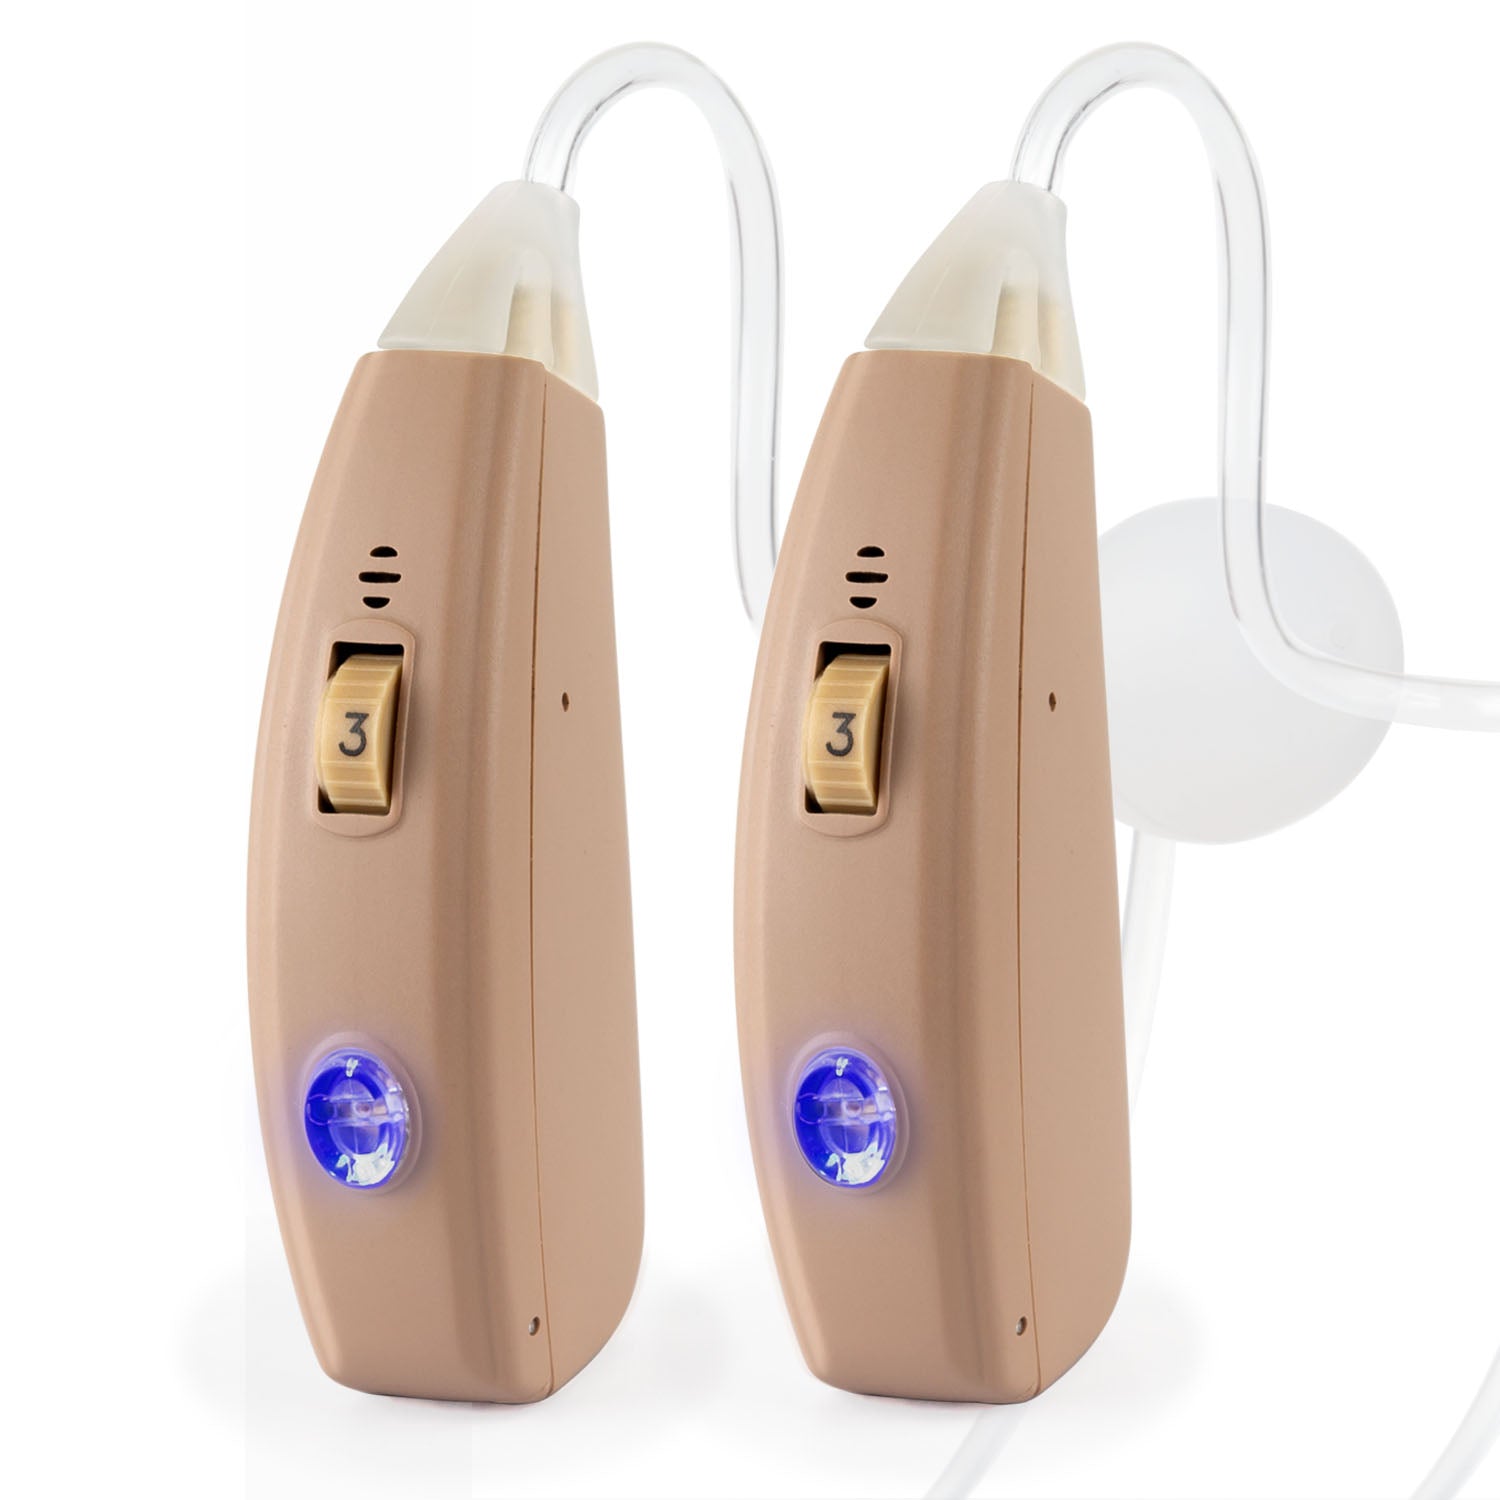 MX Rechargeable Hearing Aids with Dual Microphone - Pair